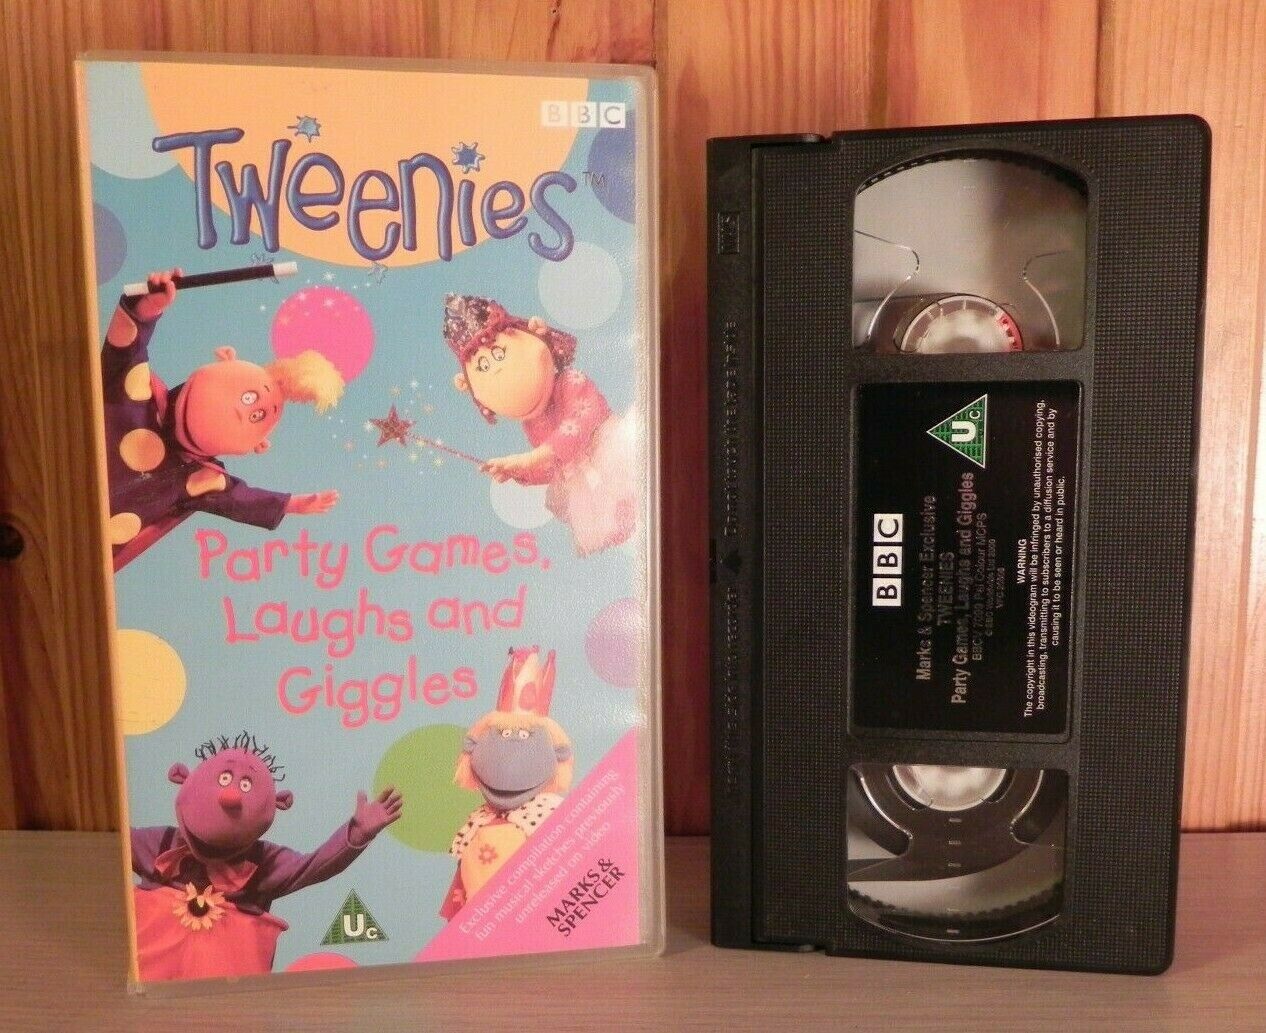 Tweenies: Party Games, Laughs And Giggles - Educational - Children's - Pal VHS-